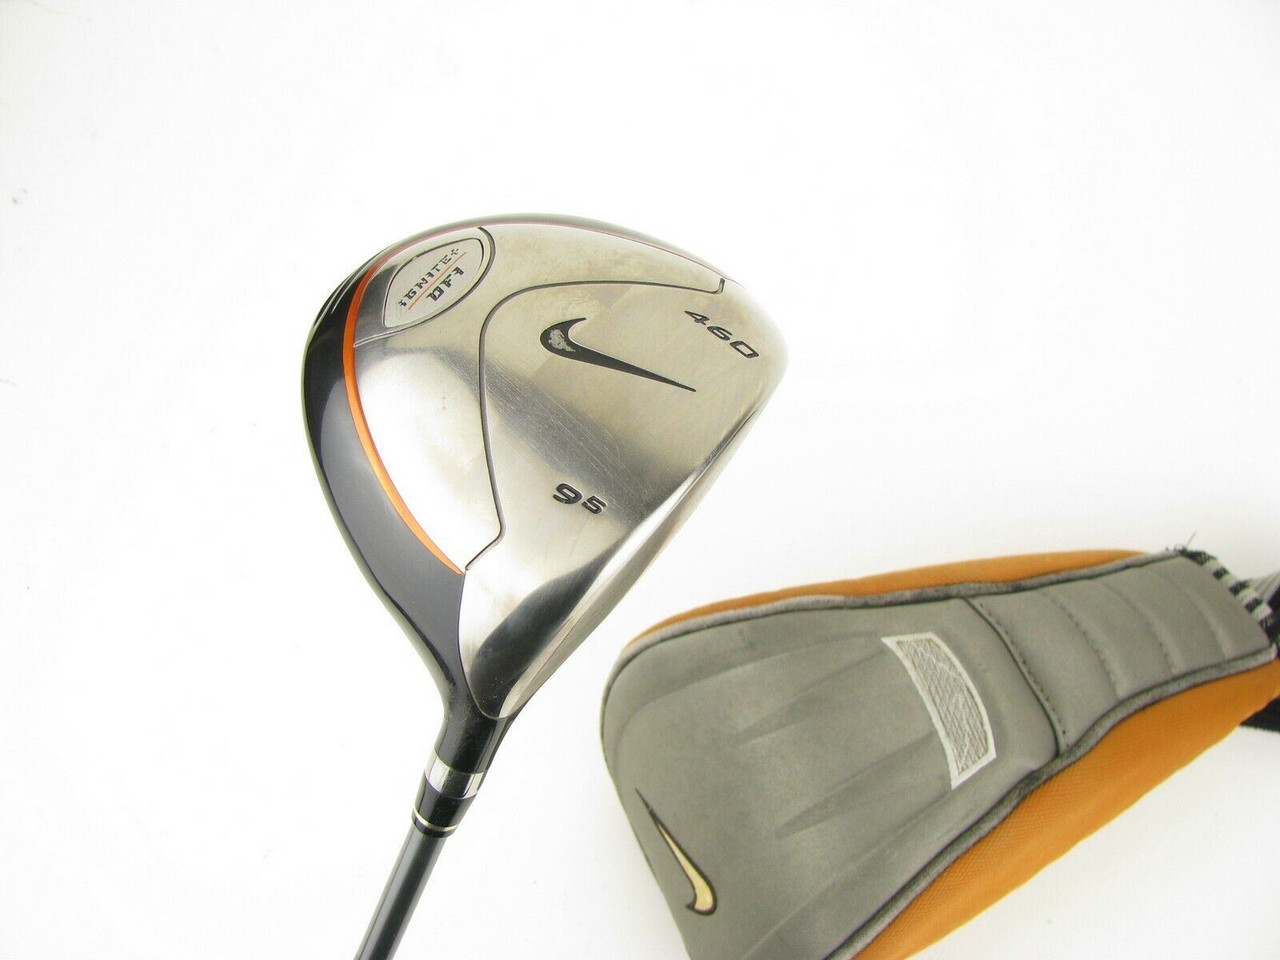 JAPAN Nike Ignite DFI 460 Driver 9.5 degree with Graphite Stiff +Headcover  - Clubs n Covers Golf